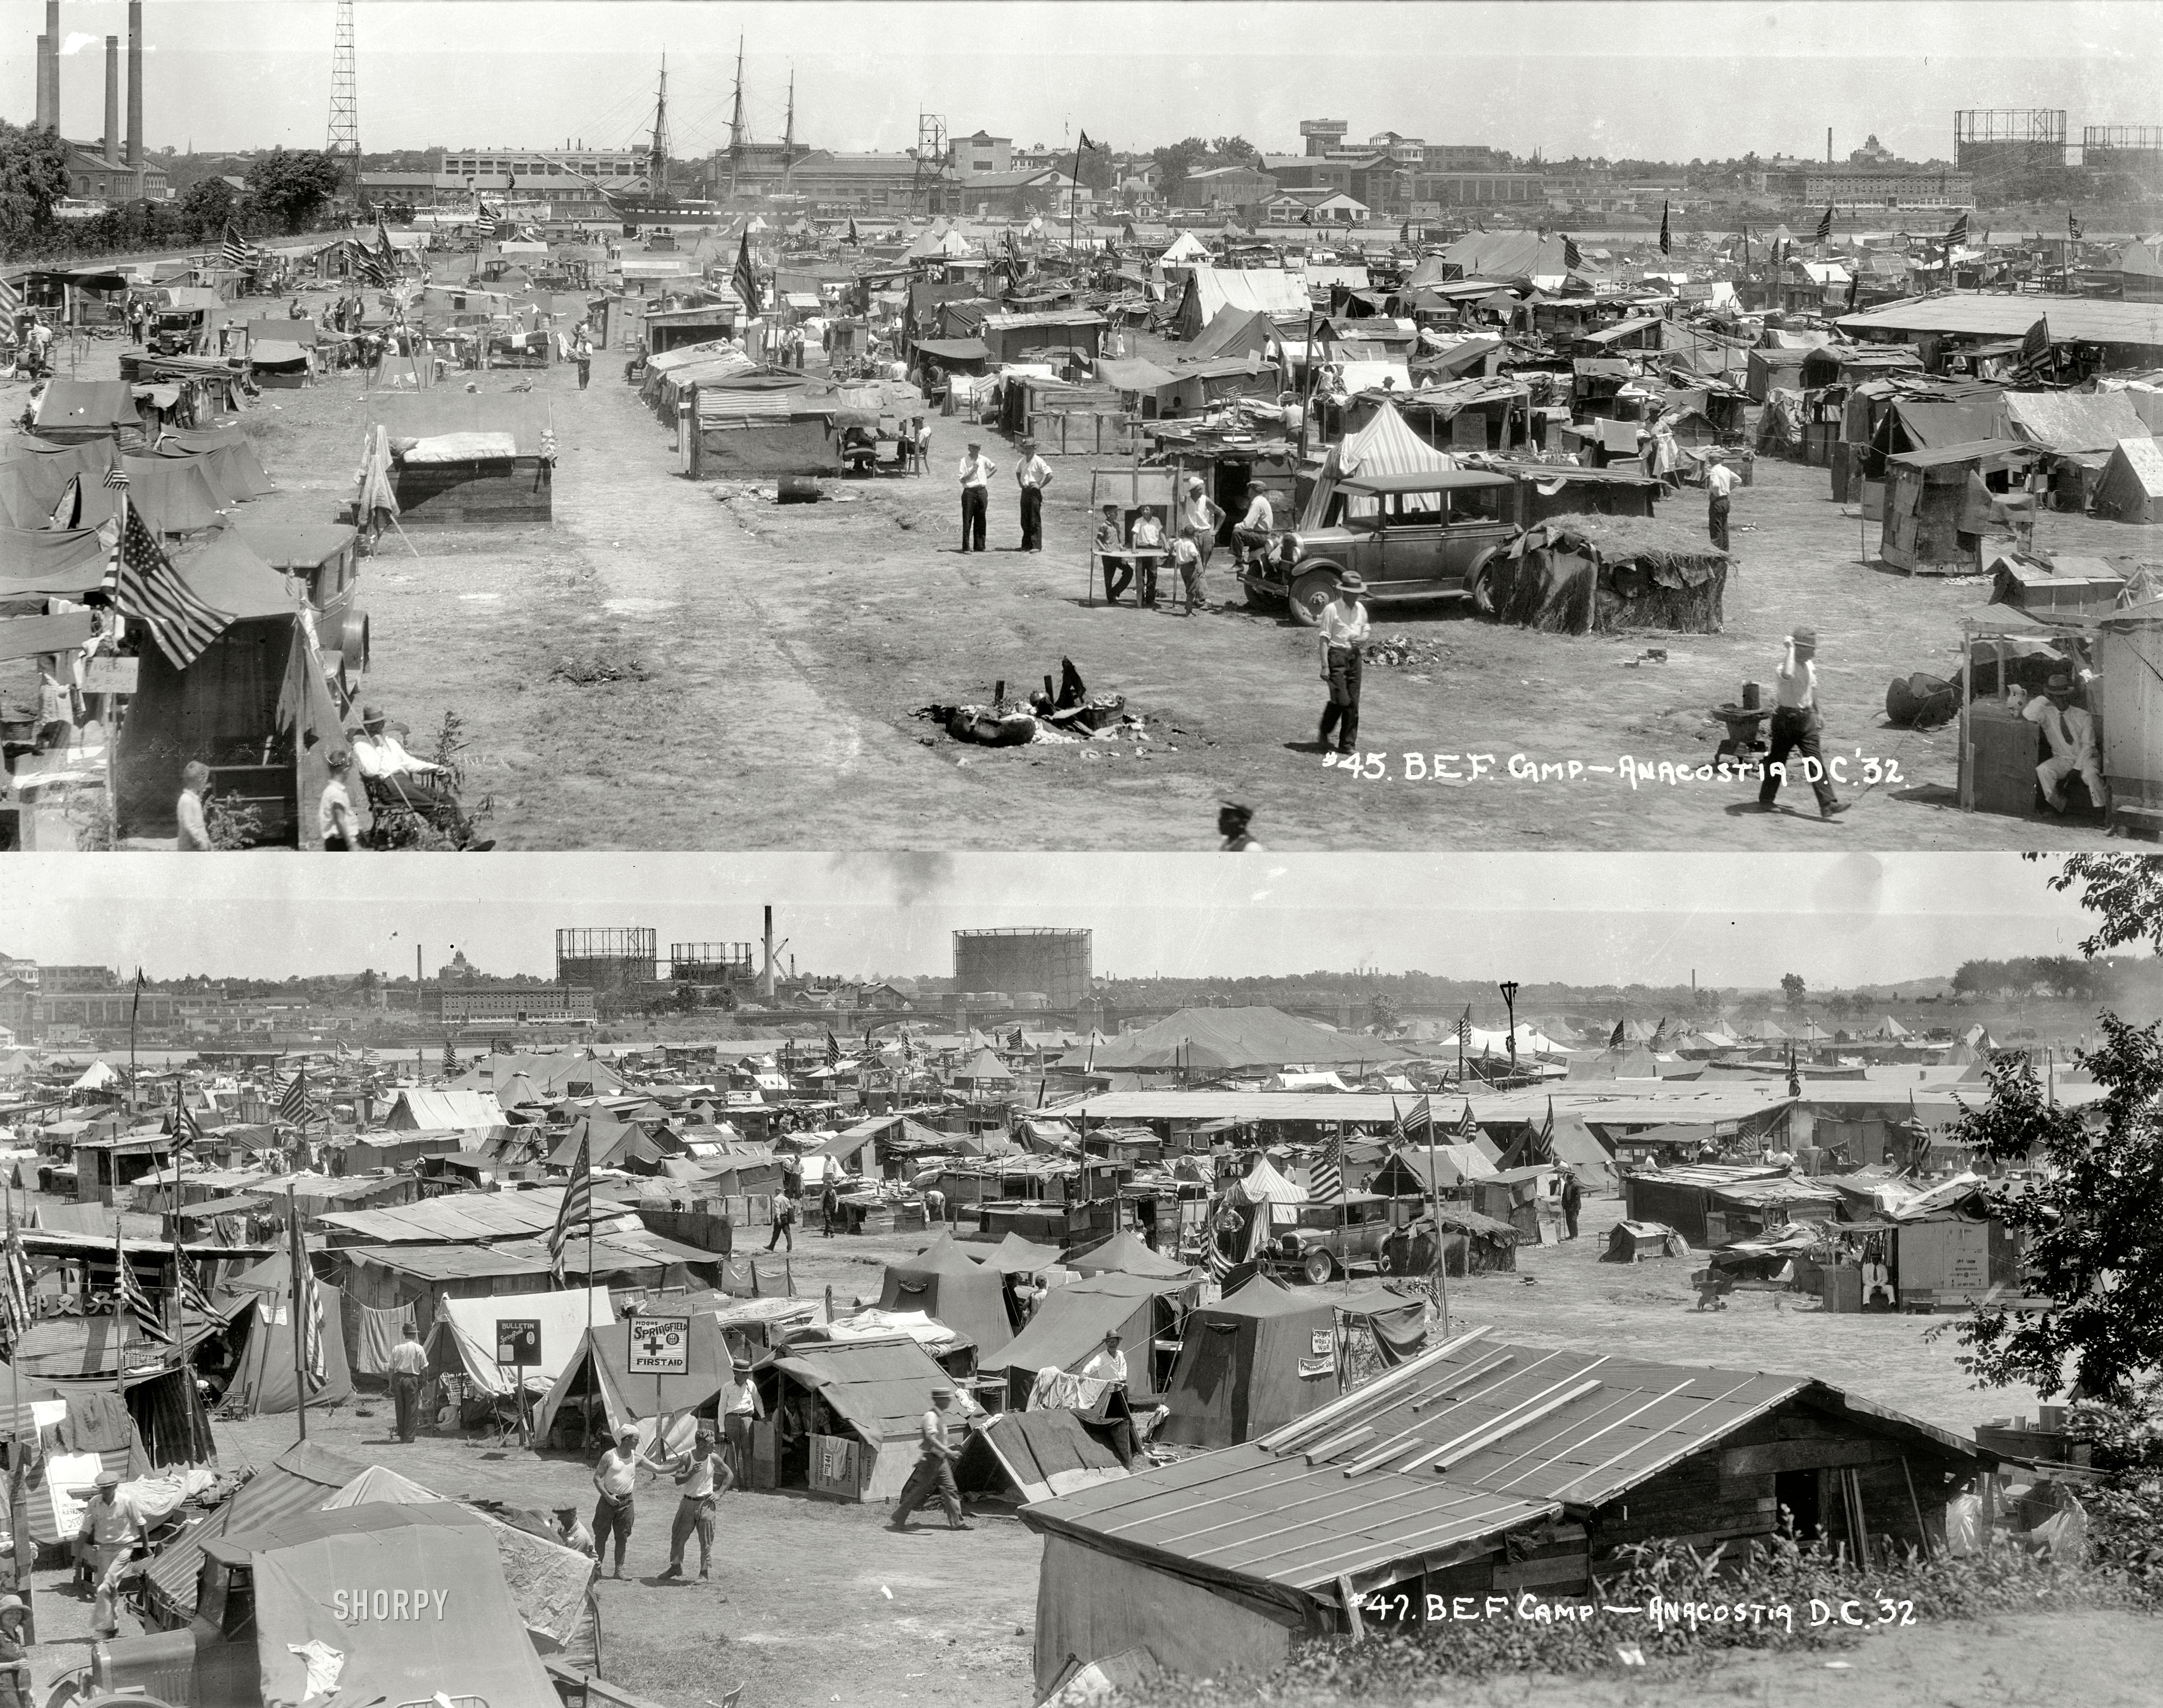 "B.E.F. camp, Anacostia, 1932." The "Bonus Expeditionary Force" encampment of World War I veterans (the Bonus Army) and their families in Washington, D.C. 8x10 acetate negative, National Photo Company Collection. View full size.